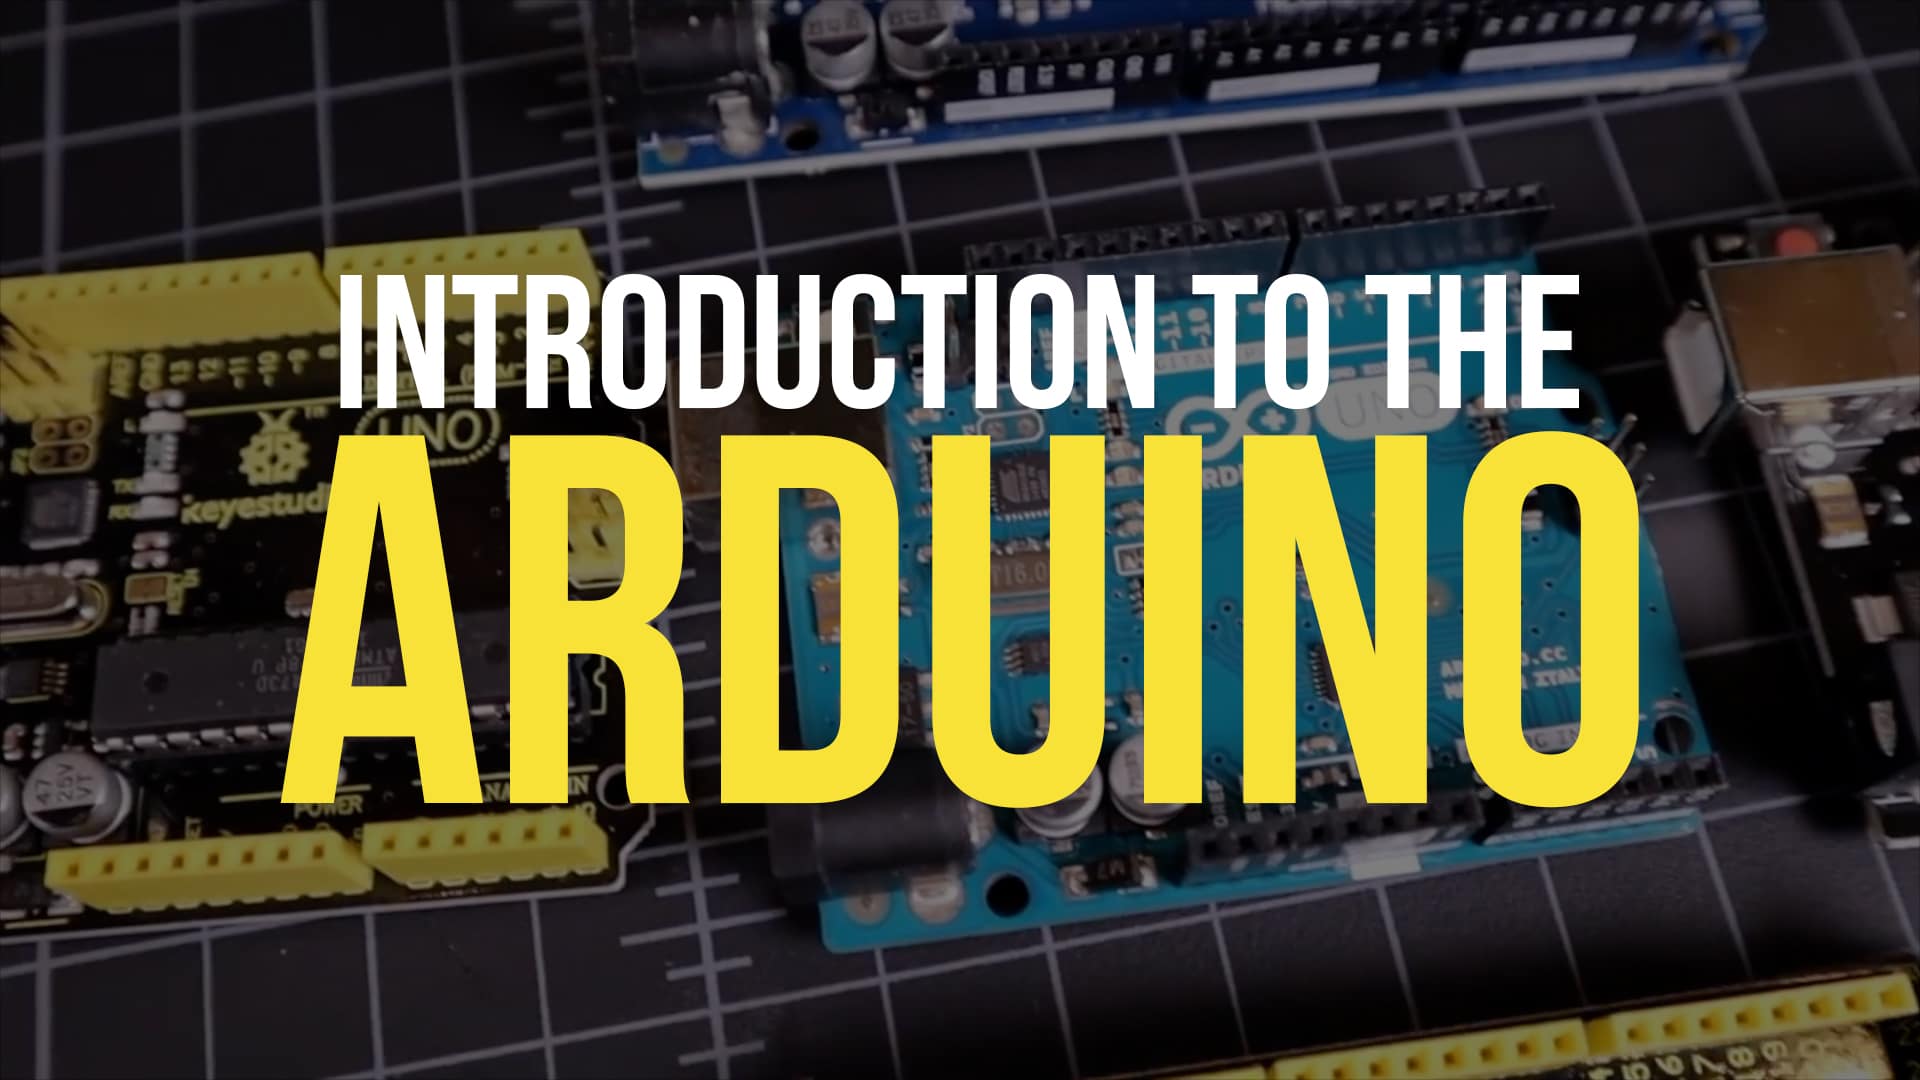 Introduction to the Arduino